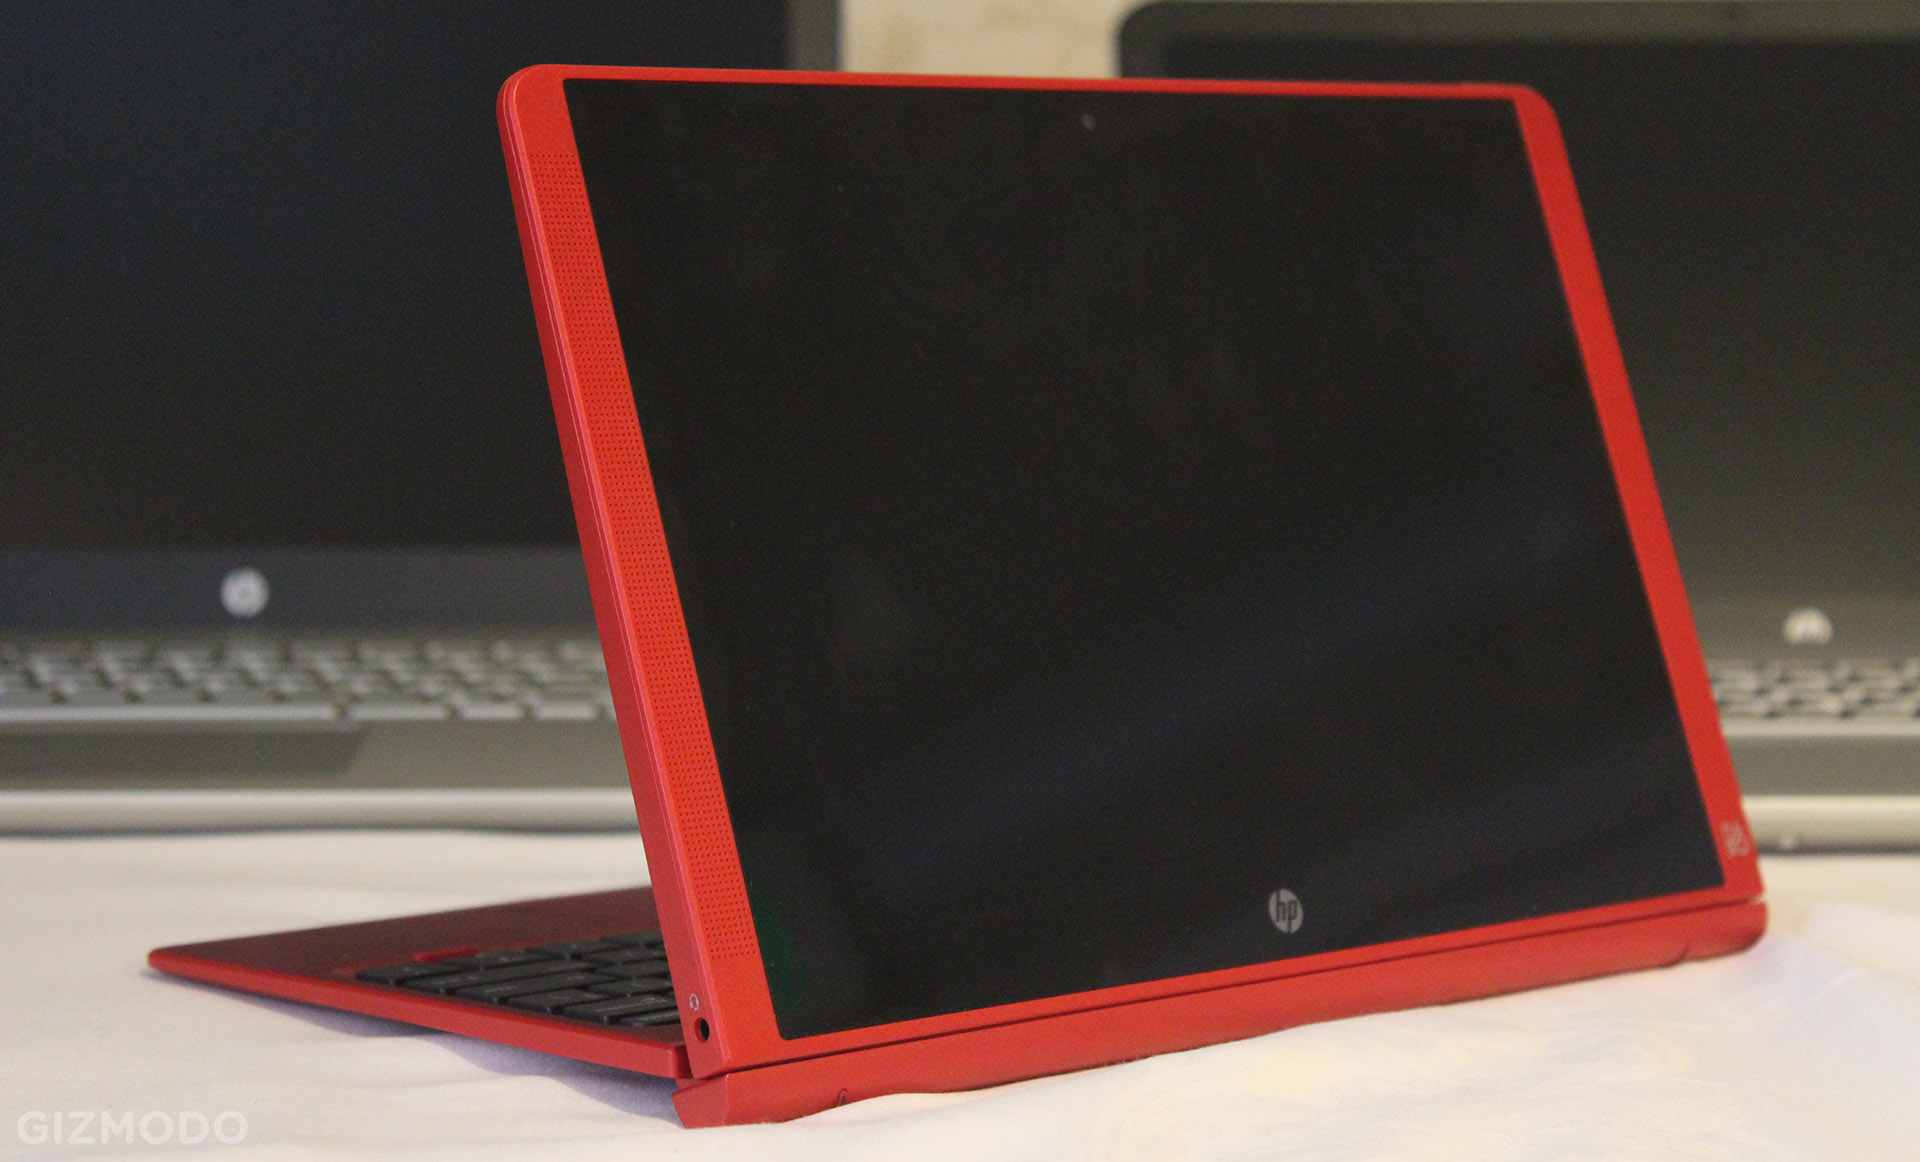 HP Fixed Everything Wrong With Its Budget-Friendly Detachable Notebook